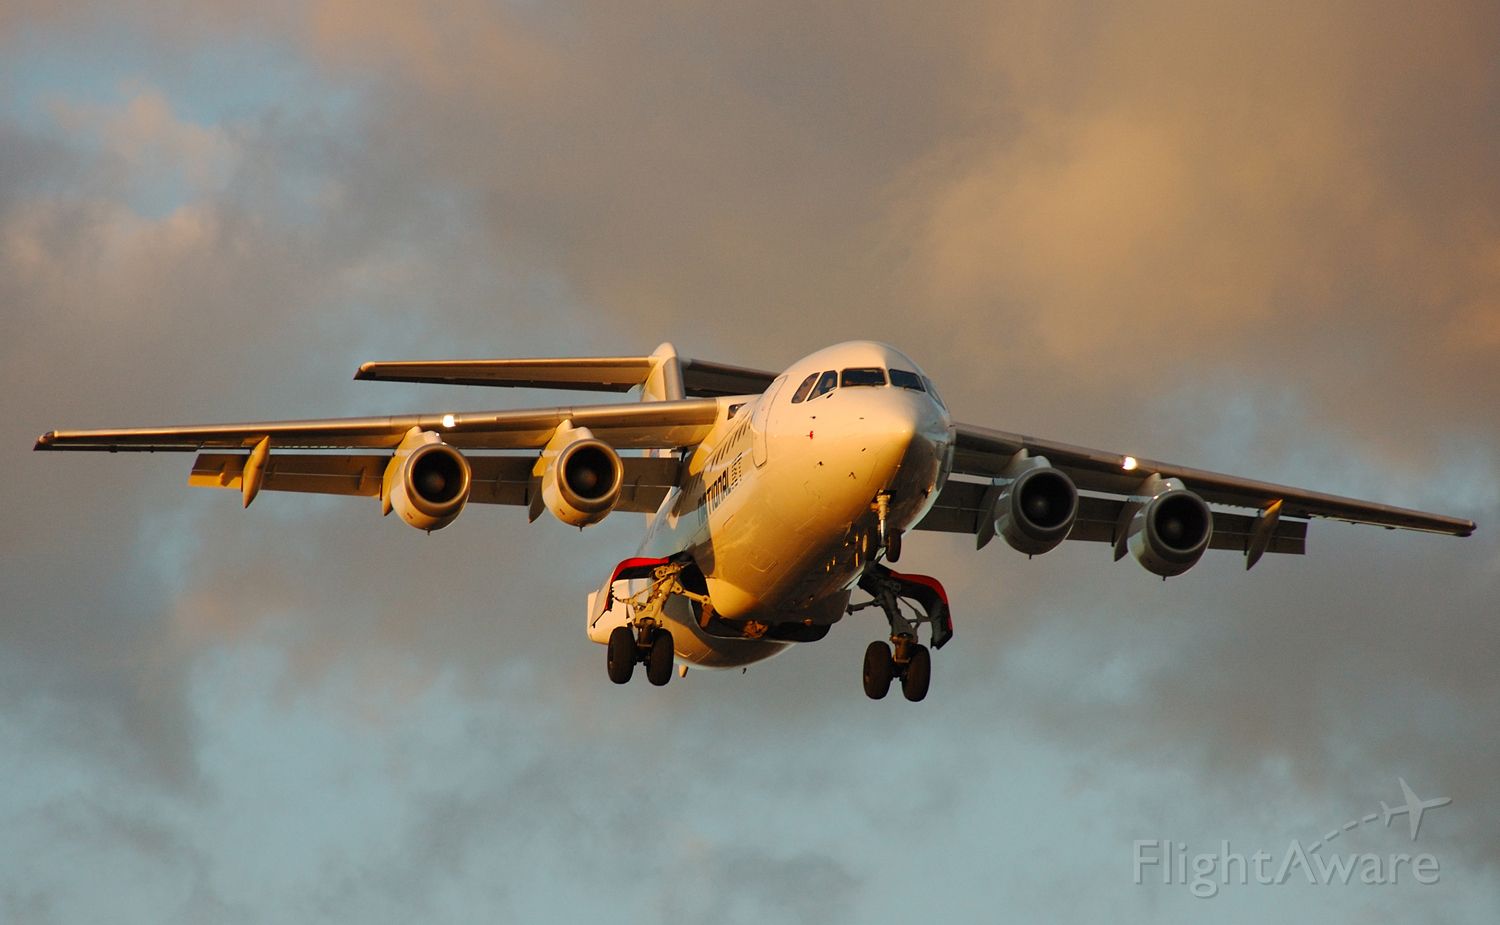 British Aerospace BAe-146-200 (VH-NJG) - Late afternoon arrival on short final for Rwy 23, Adelaide, South Australia, September 4, 2008.